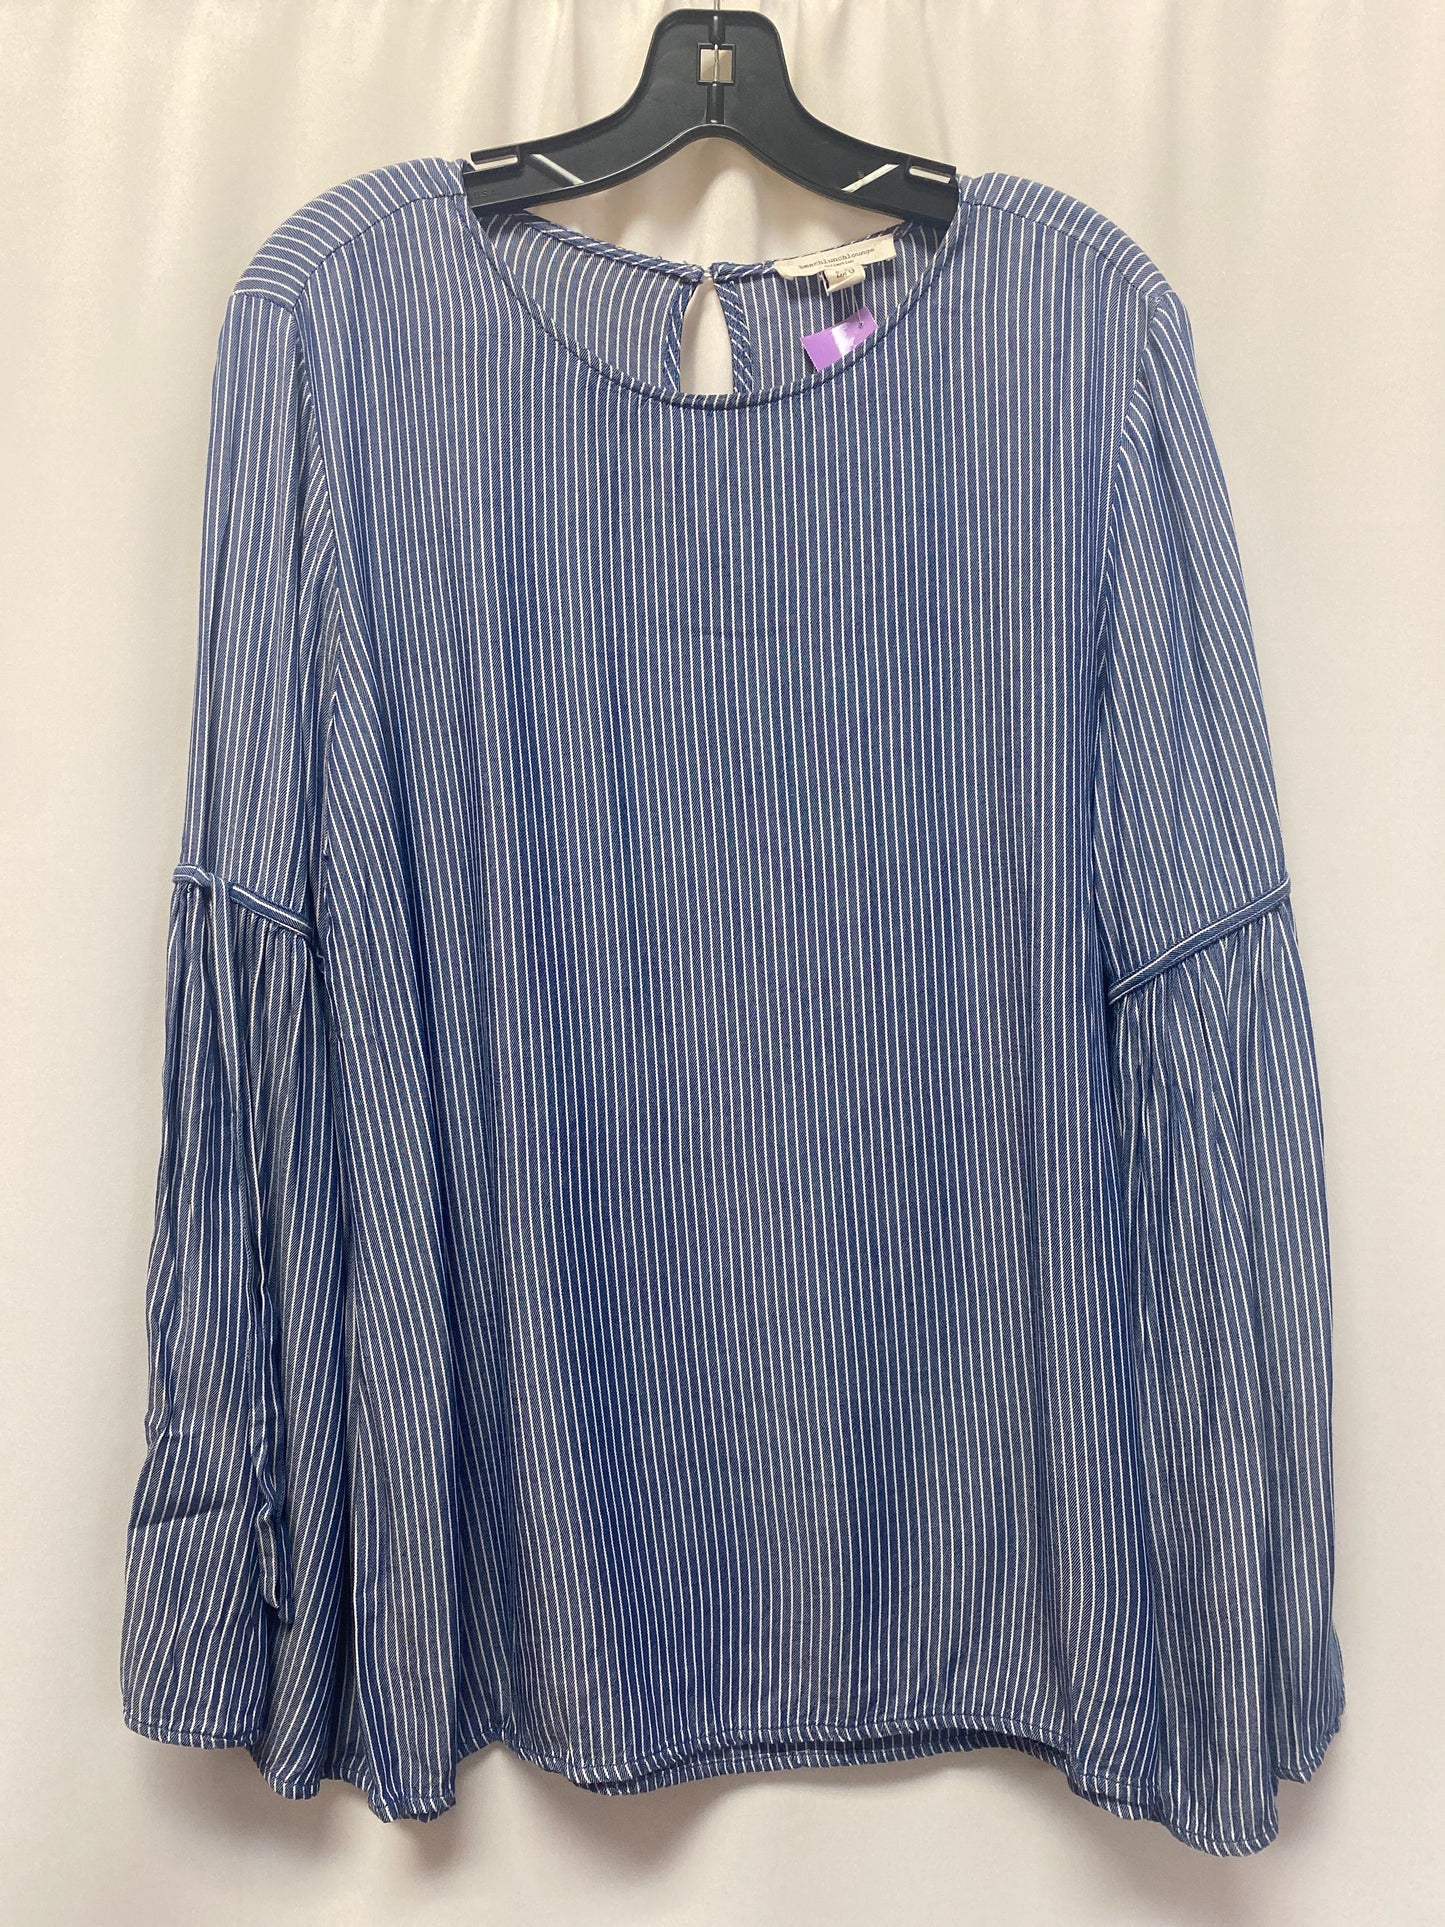 Blue Top Long Sleeve Beachlunchlounge, Size L